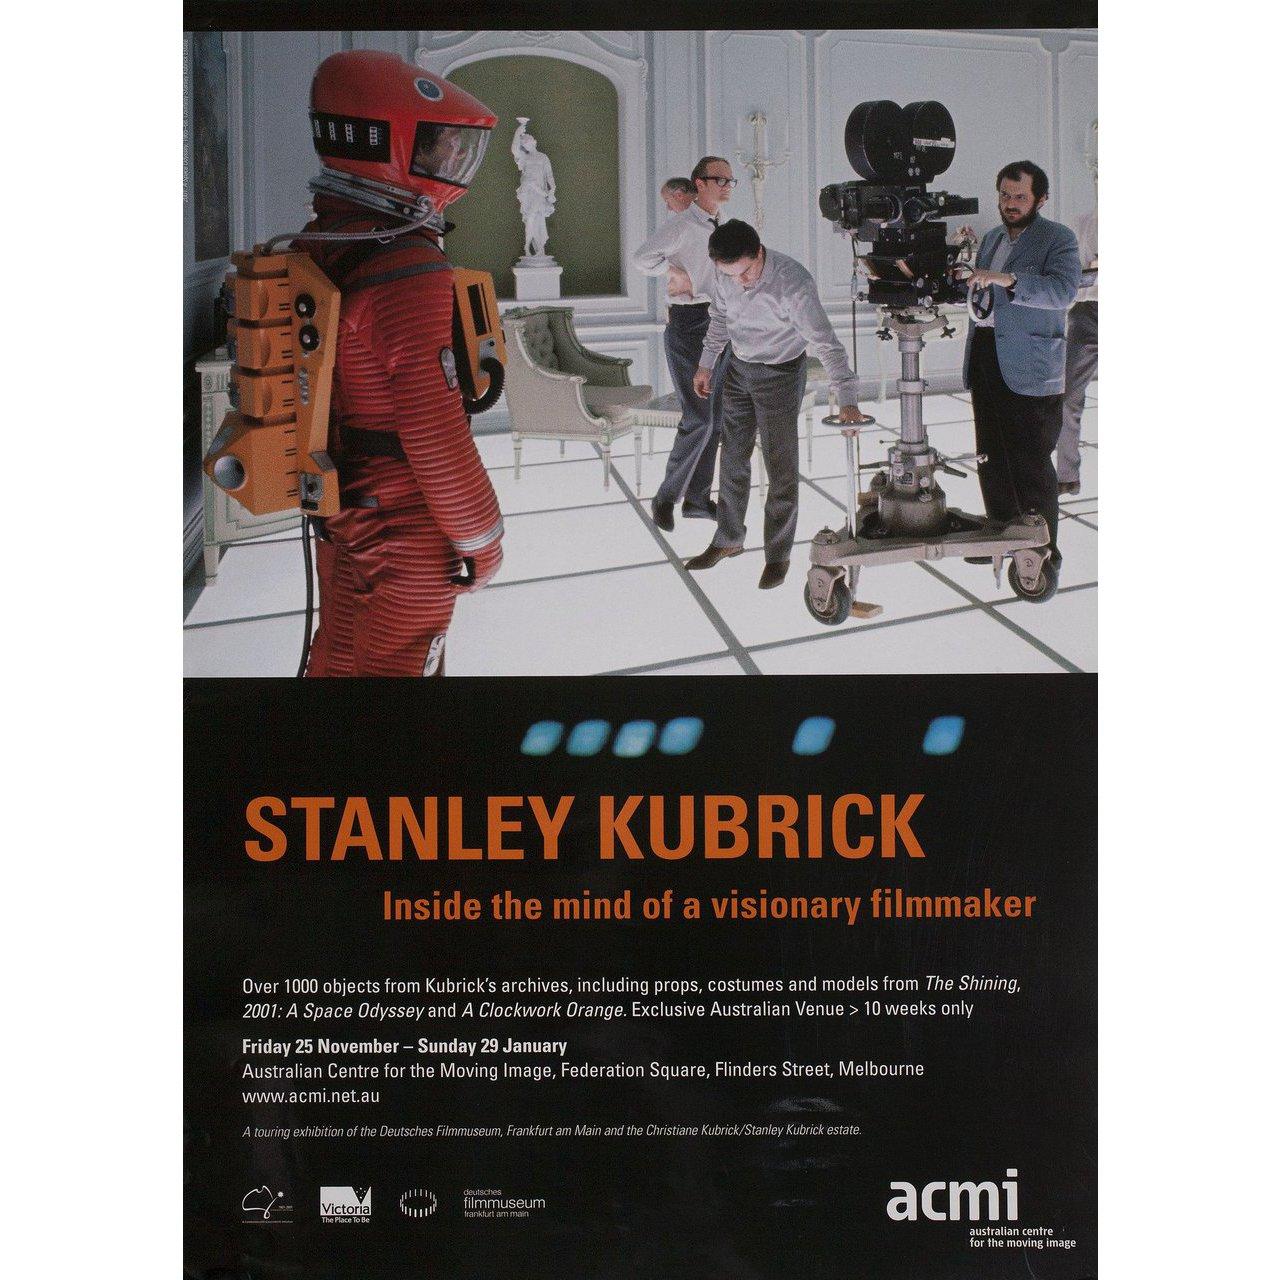 Original 2015 Australian A2 poster for the exhibition Stanley Kubrick, Inside the Mind of a Visionary Filmaker. Fine condition, folded. Many original posters were issued folded or were subsequently folded. Please note: the size is stated in inches